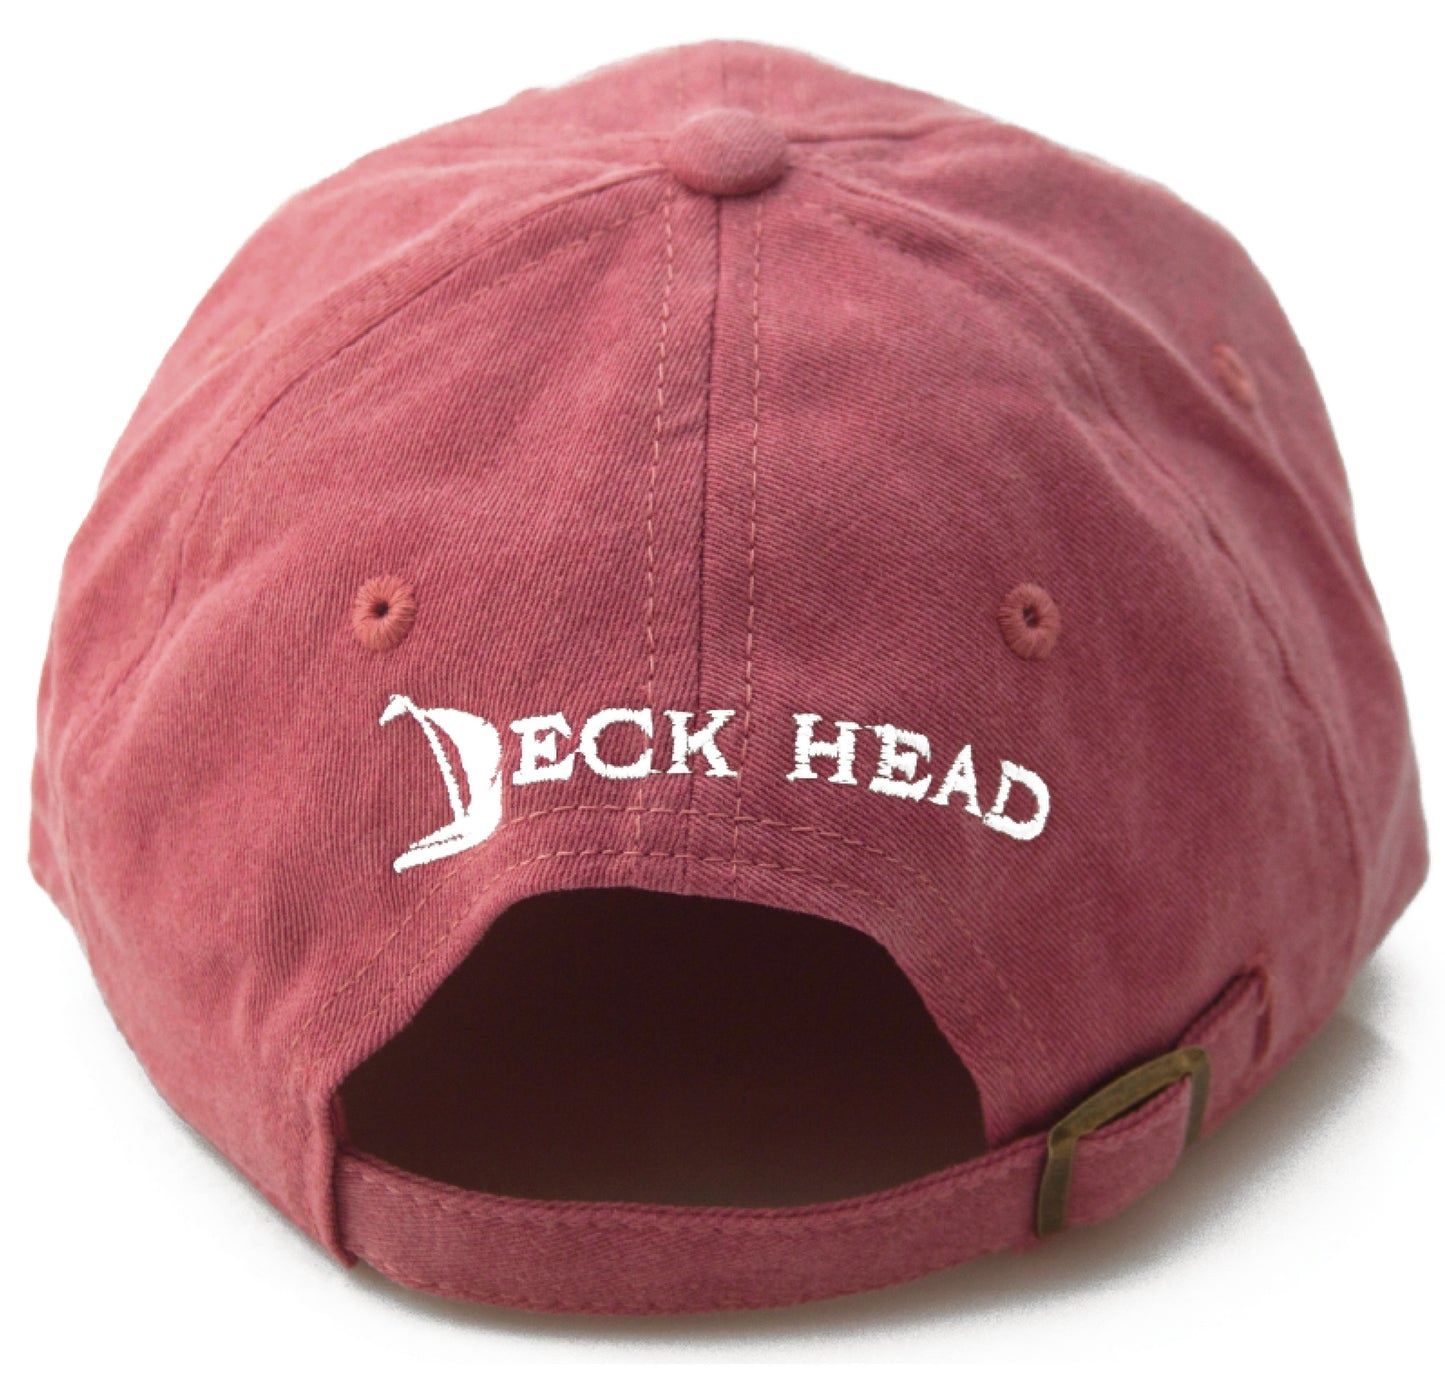 Deck Head - Red